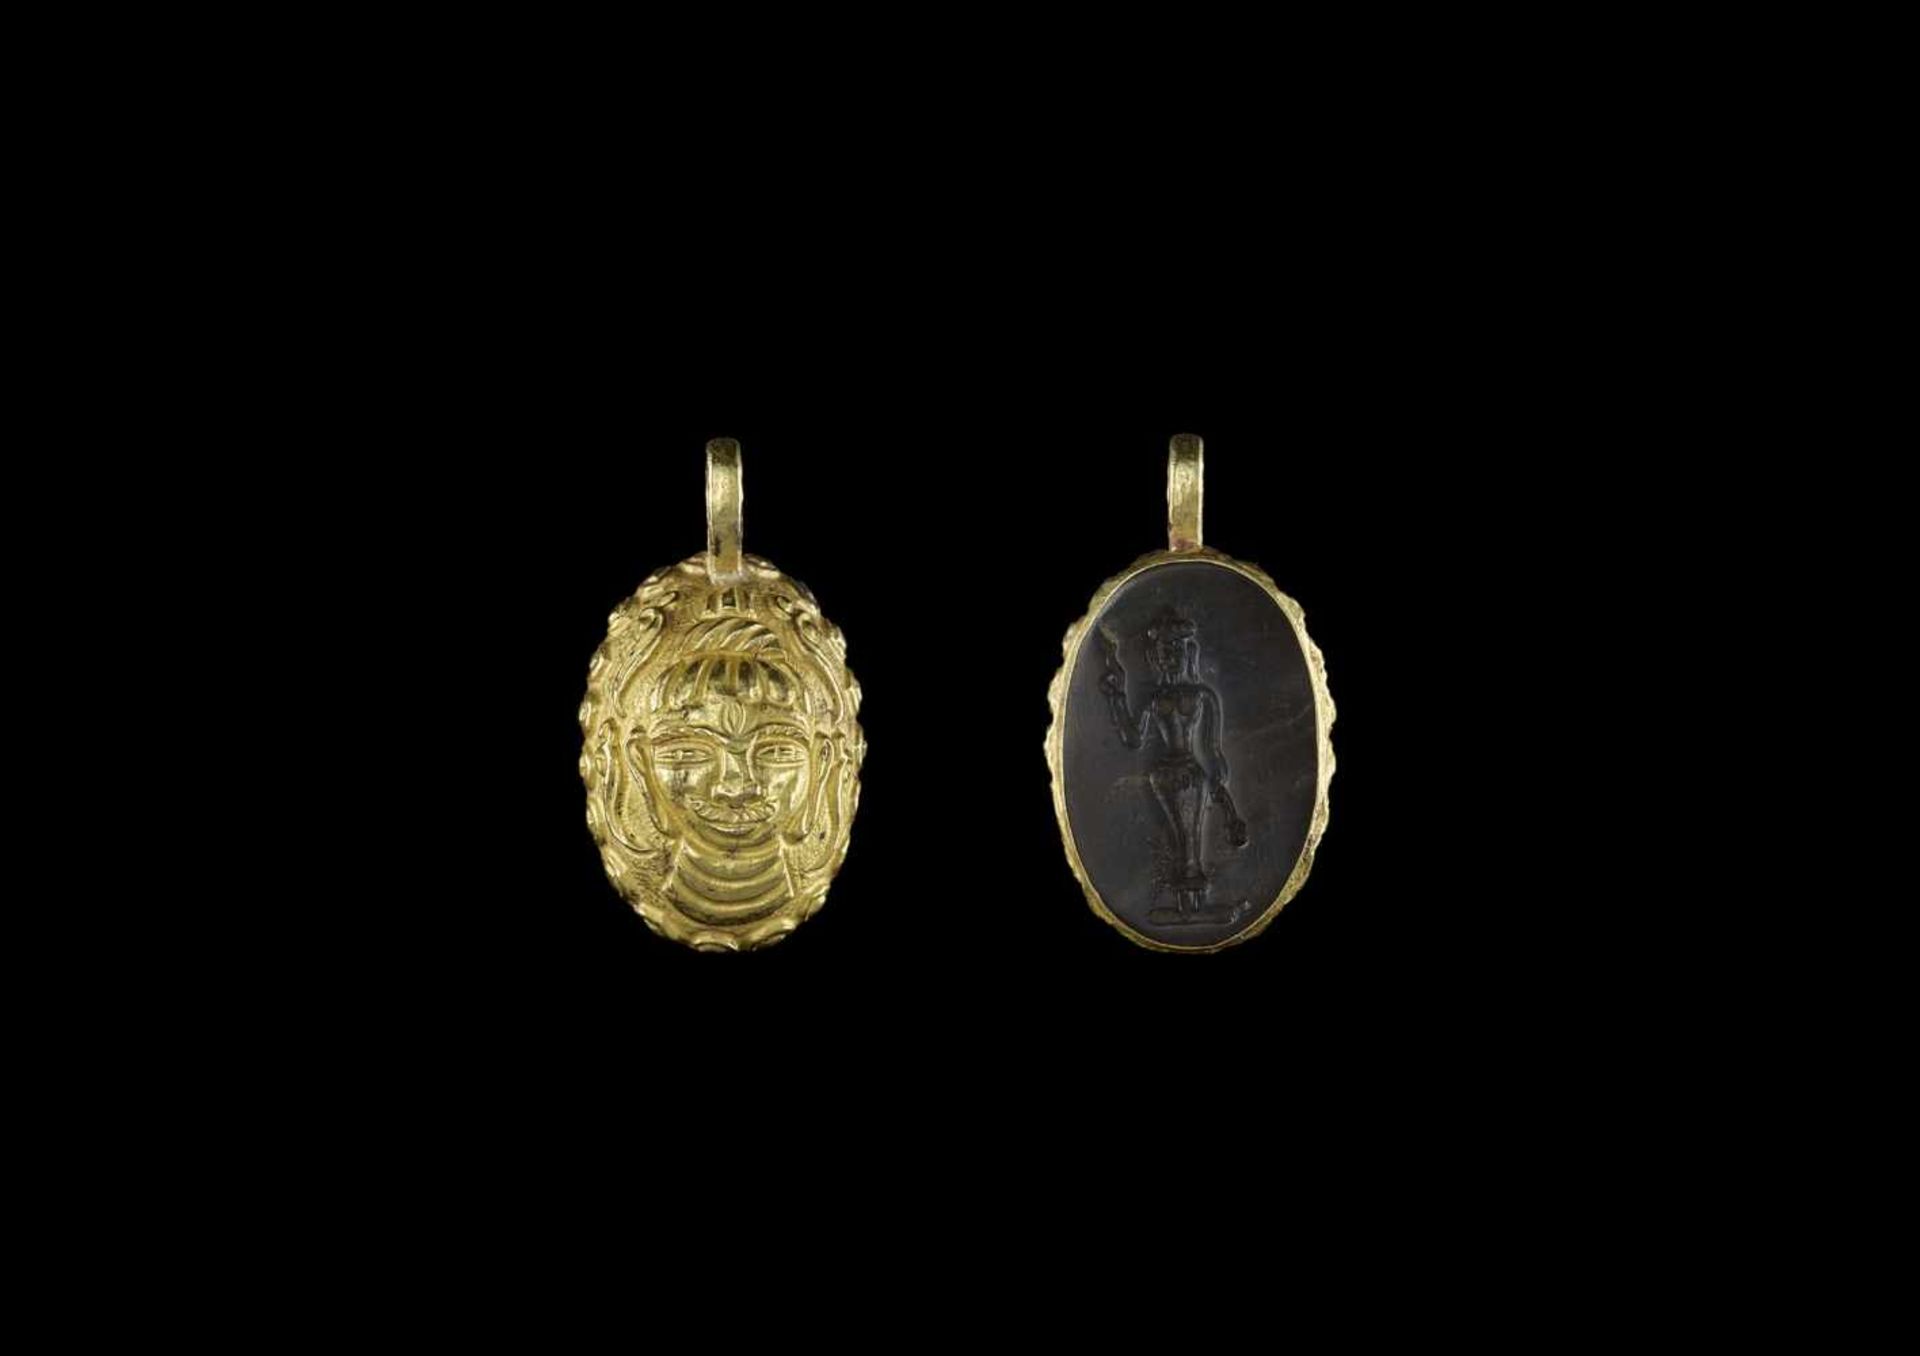 A CHAM GOLD PENDANT WITH STONE INTAGLIO DEPICTING SHIVA AND A HINDU DEITY Champa, early classical